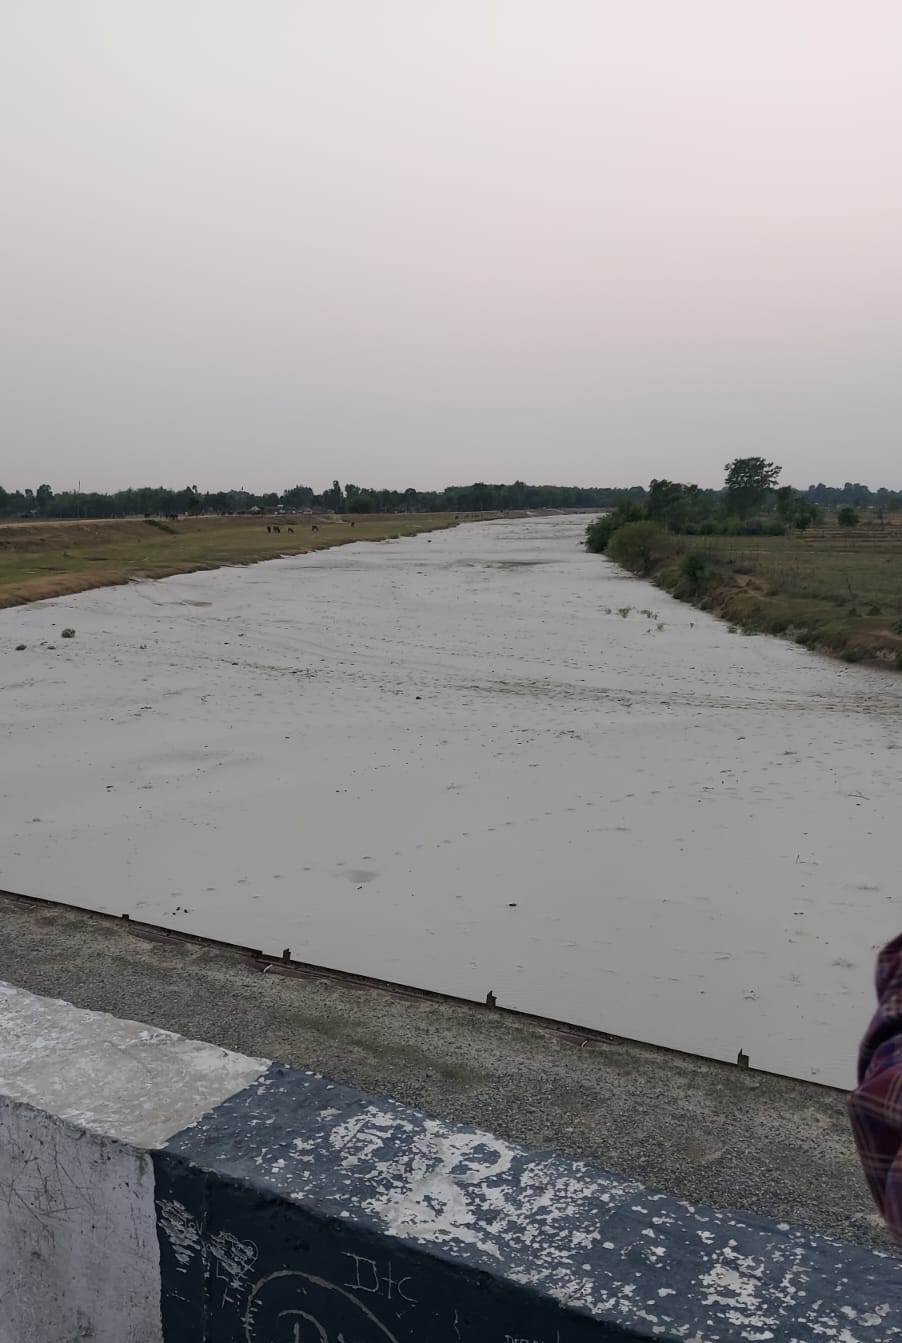 KHLC monitoring visit of the anti-erosion works on Kosi river during 16 th to 18 th May’ 2023 under the Chairmanship of Sh. Gulshan Raj, Chairman, GFCC. Mahuli river- a tributary of Kosi joins in the u/s of Kosi barrage with heap of sands/silts in its bed